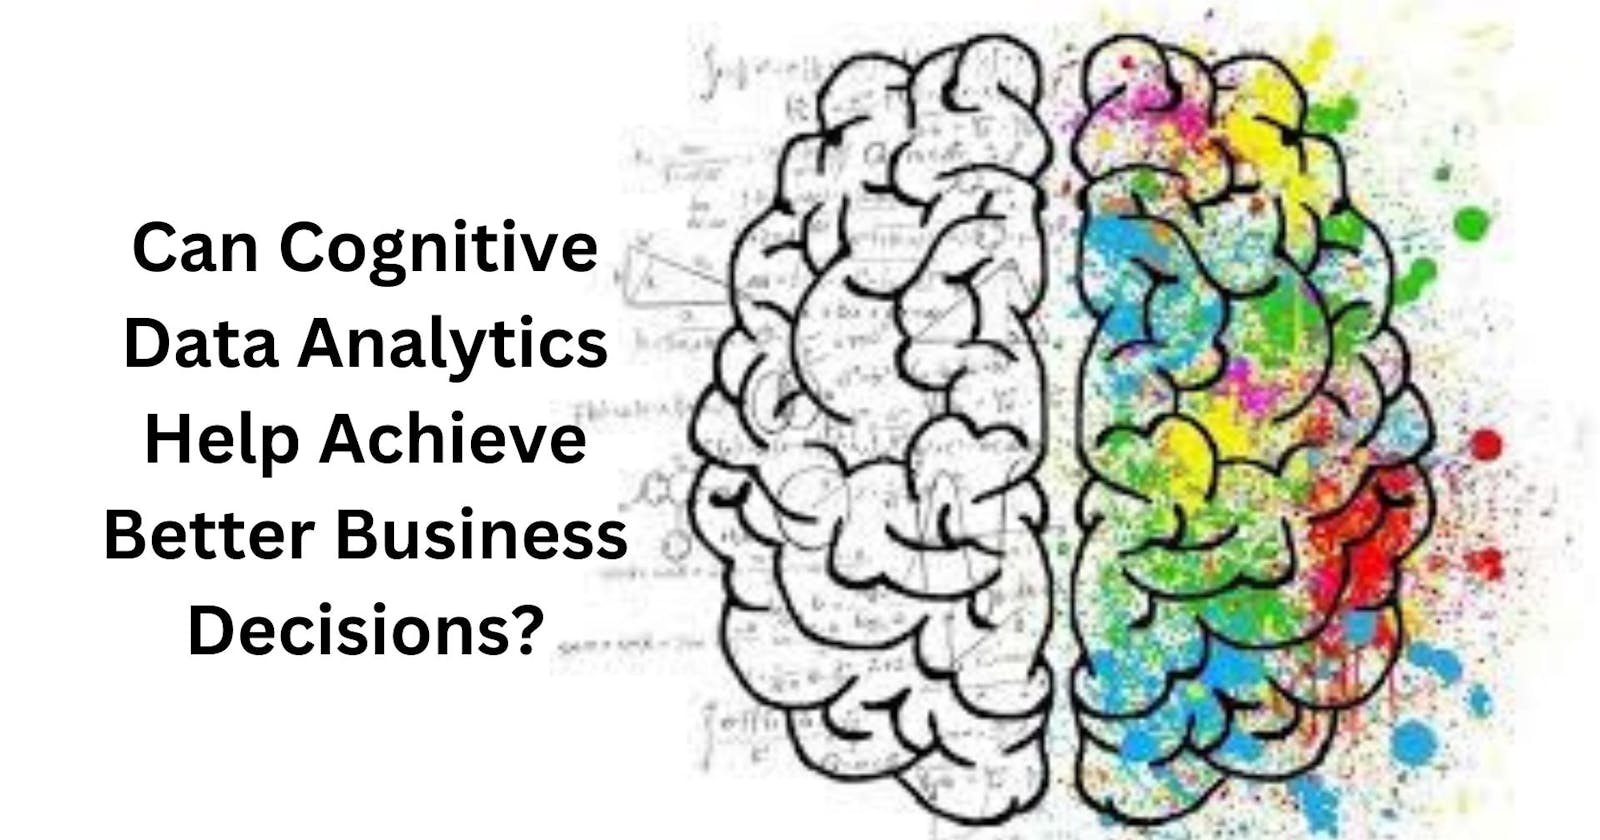 Can Cognitive Data Analytics Help Achieve Better Business Decisions?